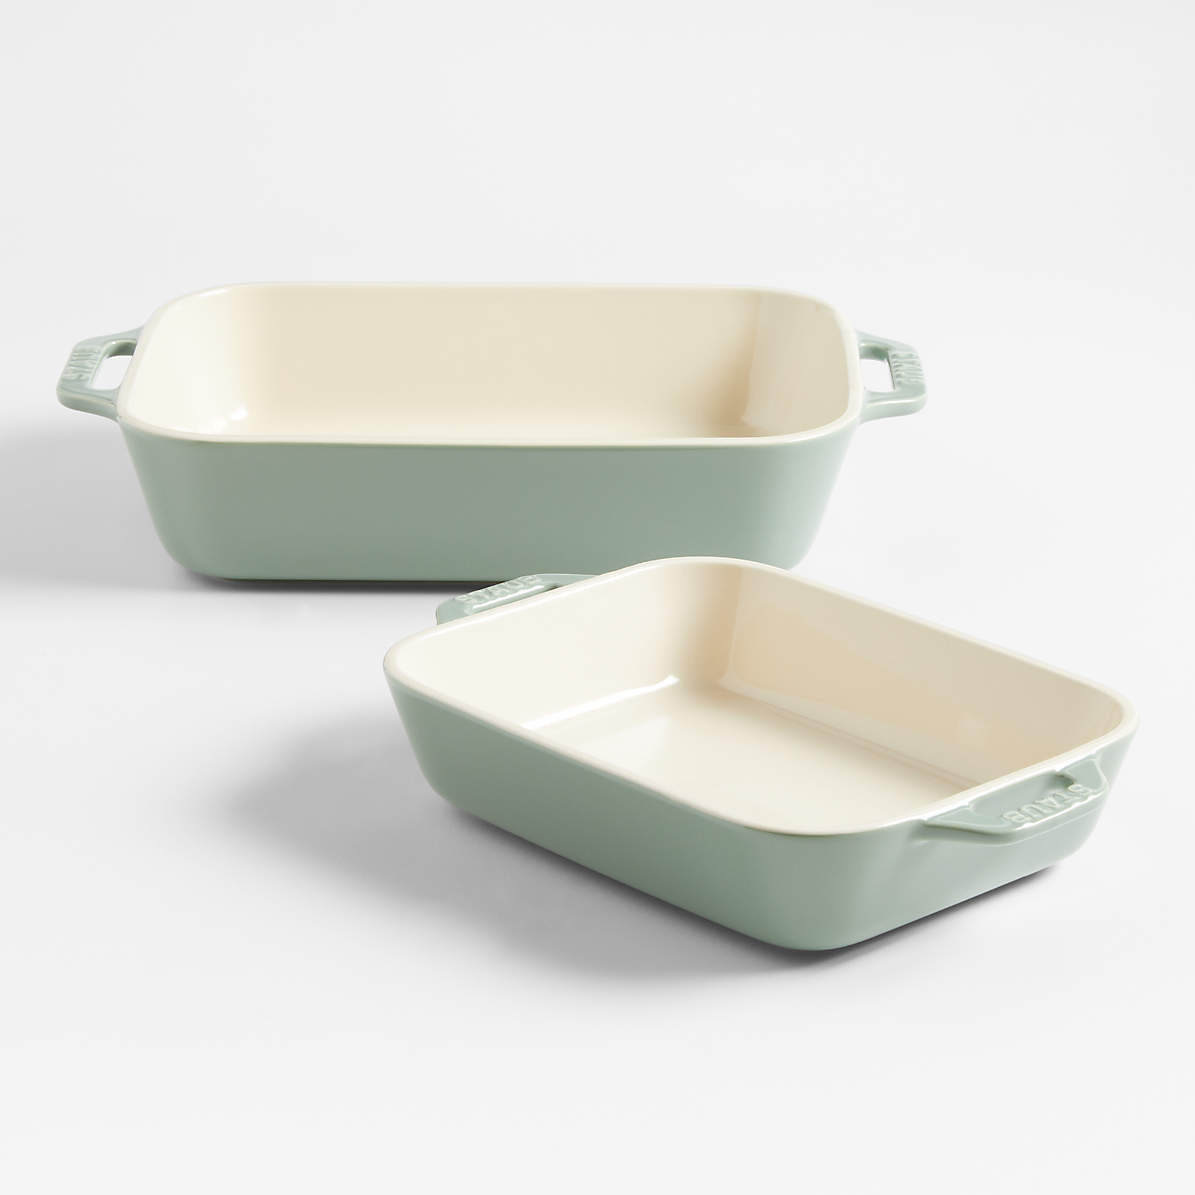 Small Ceramics Rectangular Baking Dishes With Handle For Oven Ceramic ...